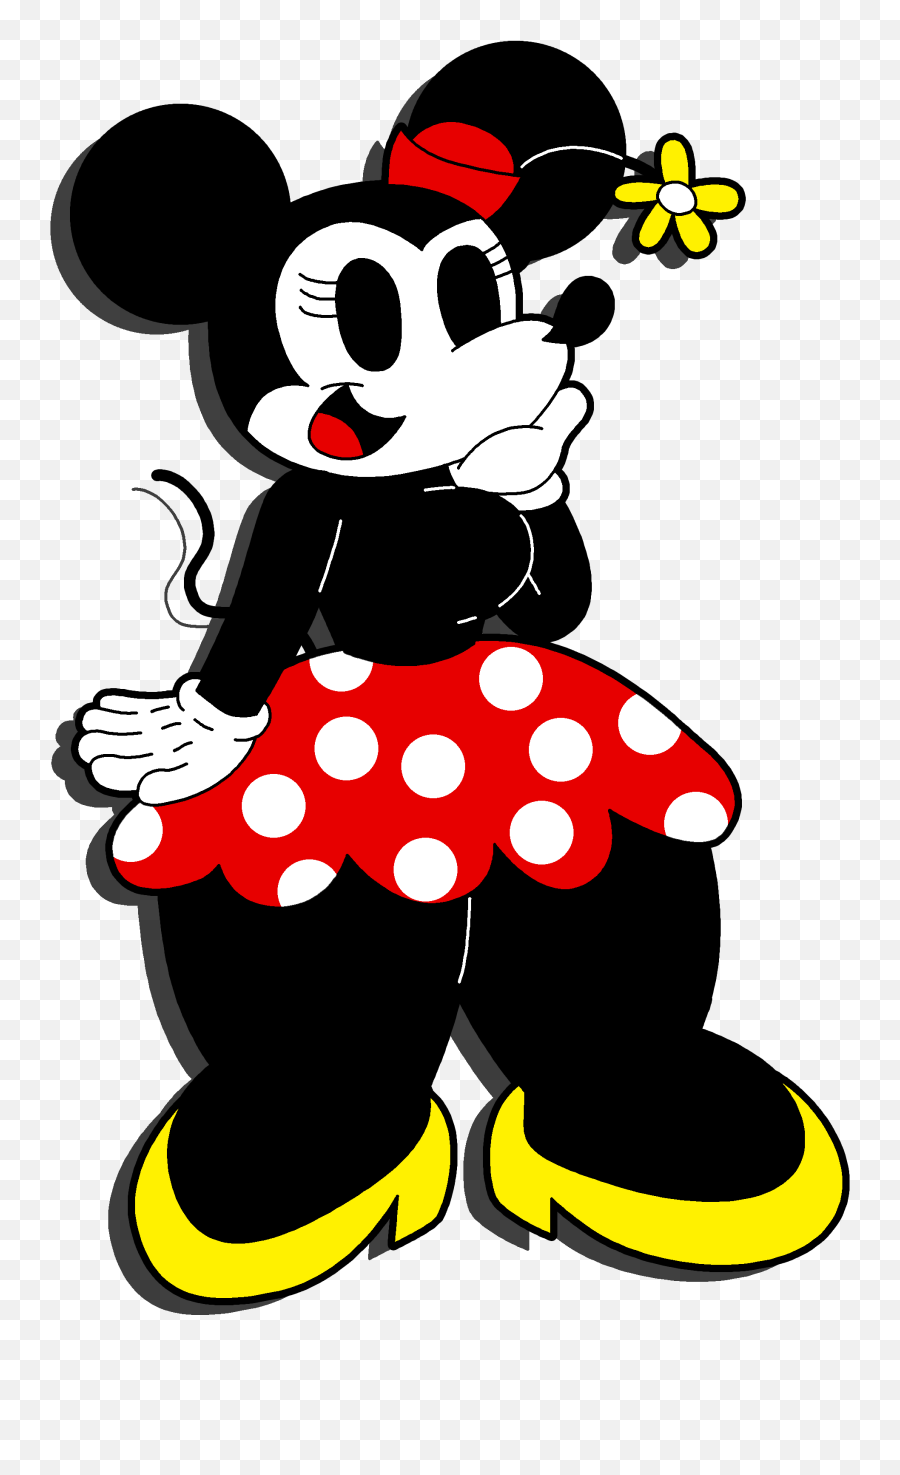 Minnie Mouse Character Clip Art - Minnie Mouse Png Minny Mouse Deviant Art Emoji,Minnie Mouse Png